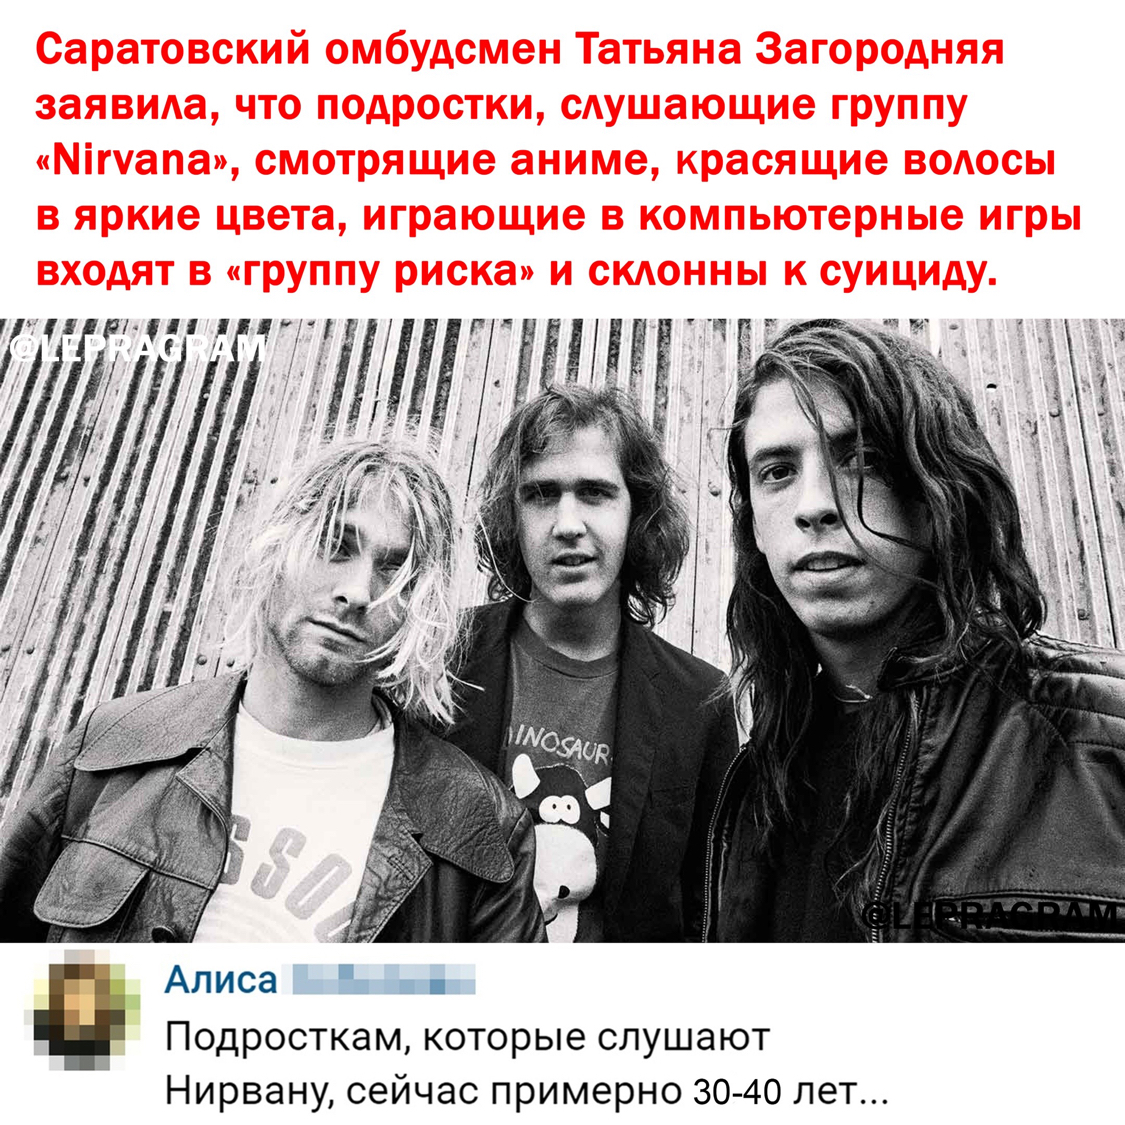 Post #7232238 - From the network, Nirvana, Youth, Comments, Humor, Picture with text